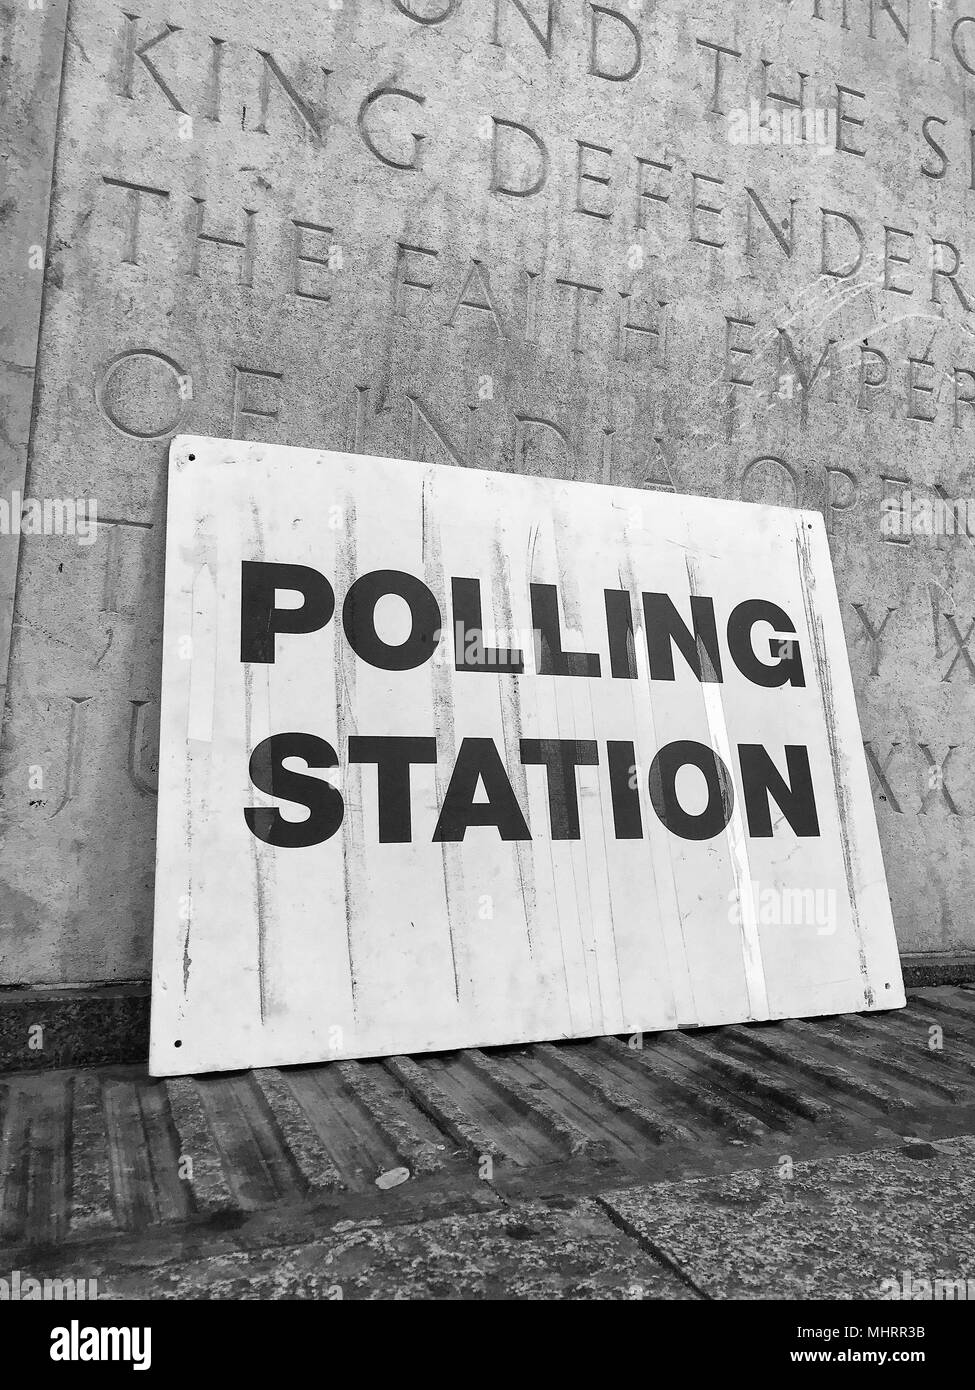 Manchester Central Library, UK. 3rd May, 2018. Polling sign in front of stone inscription at entrance to Manchester Central Library Credit: Chris Billington/Alamy Live News Stock Photo